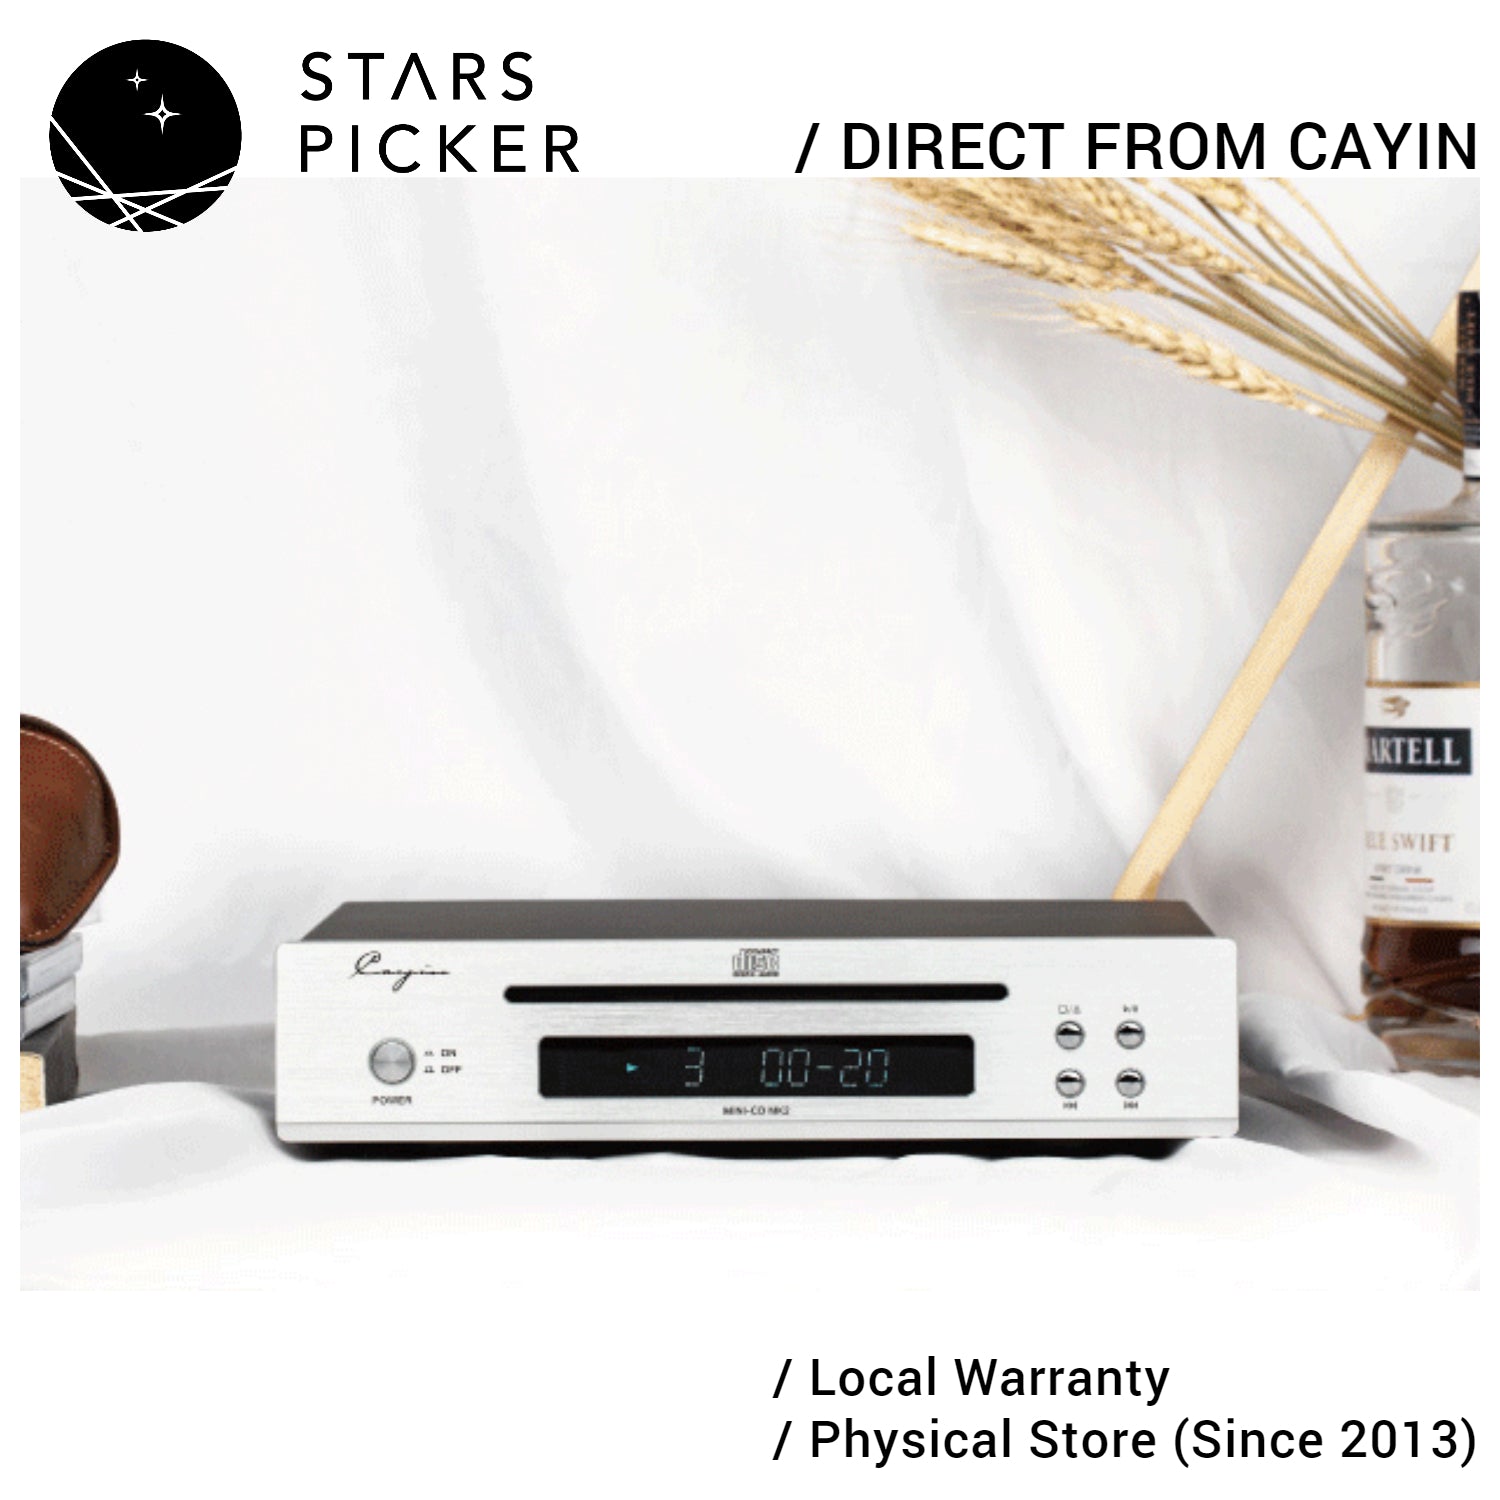 Cayin MINI-CD MK2 Compact Disc CD Player with Digital Output Coaxial I2S